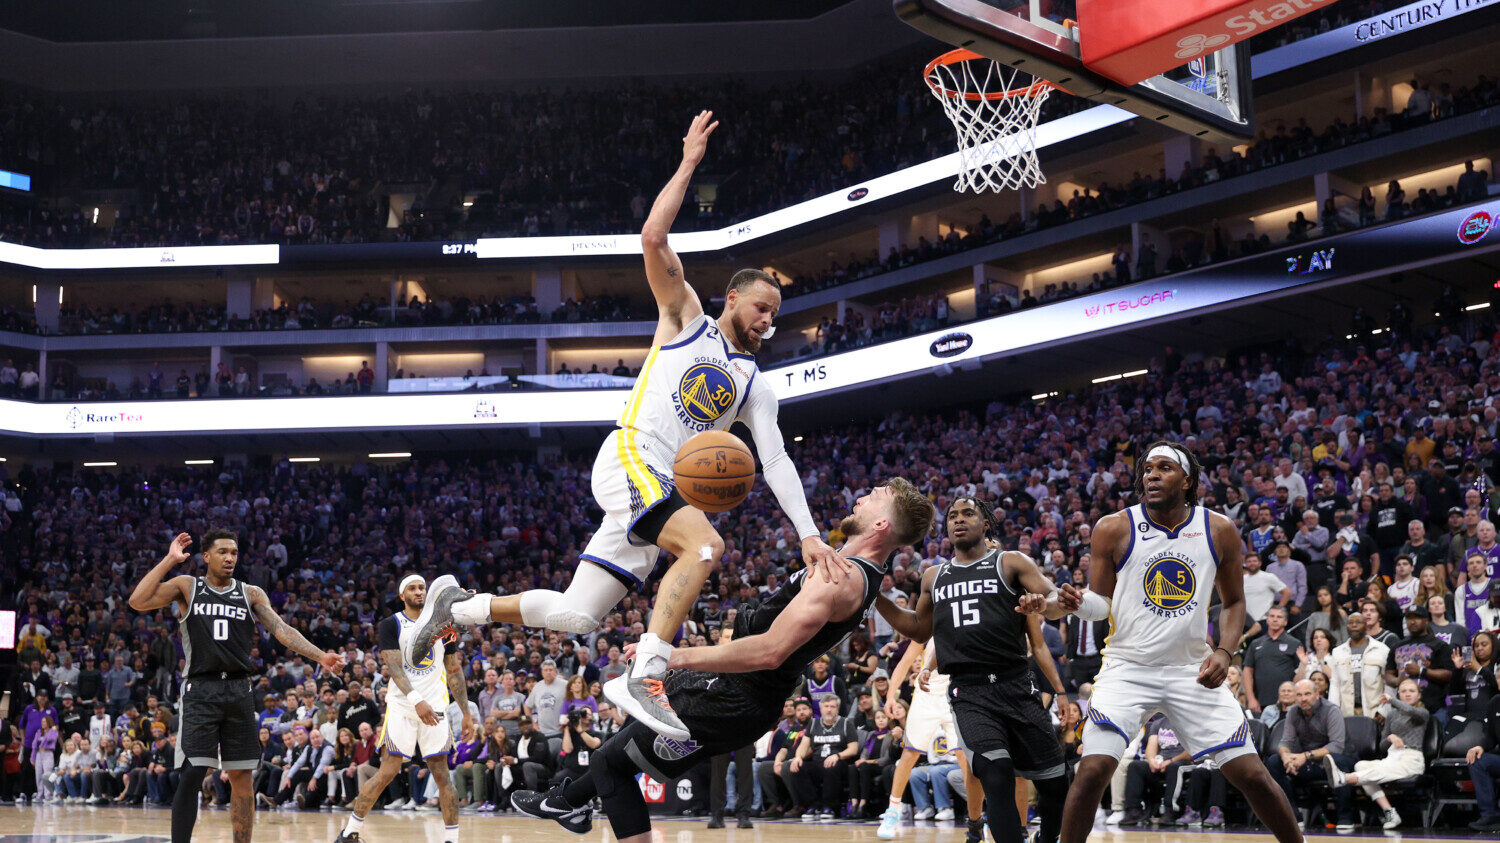 Warriors vs. Kings NBA Playoffs Game 3 Player Props Betting Odds